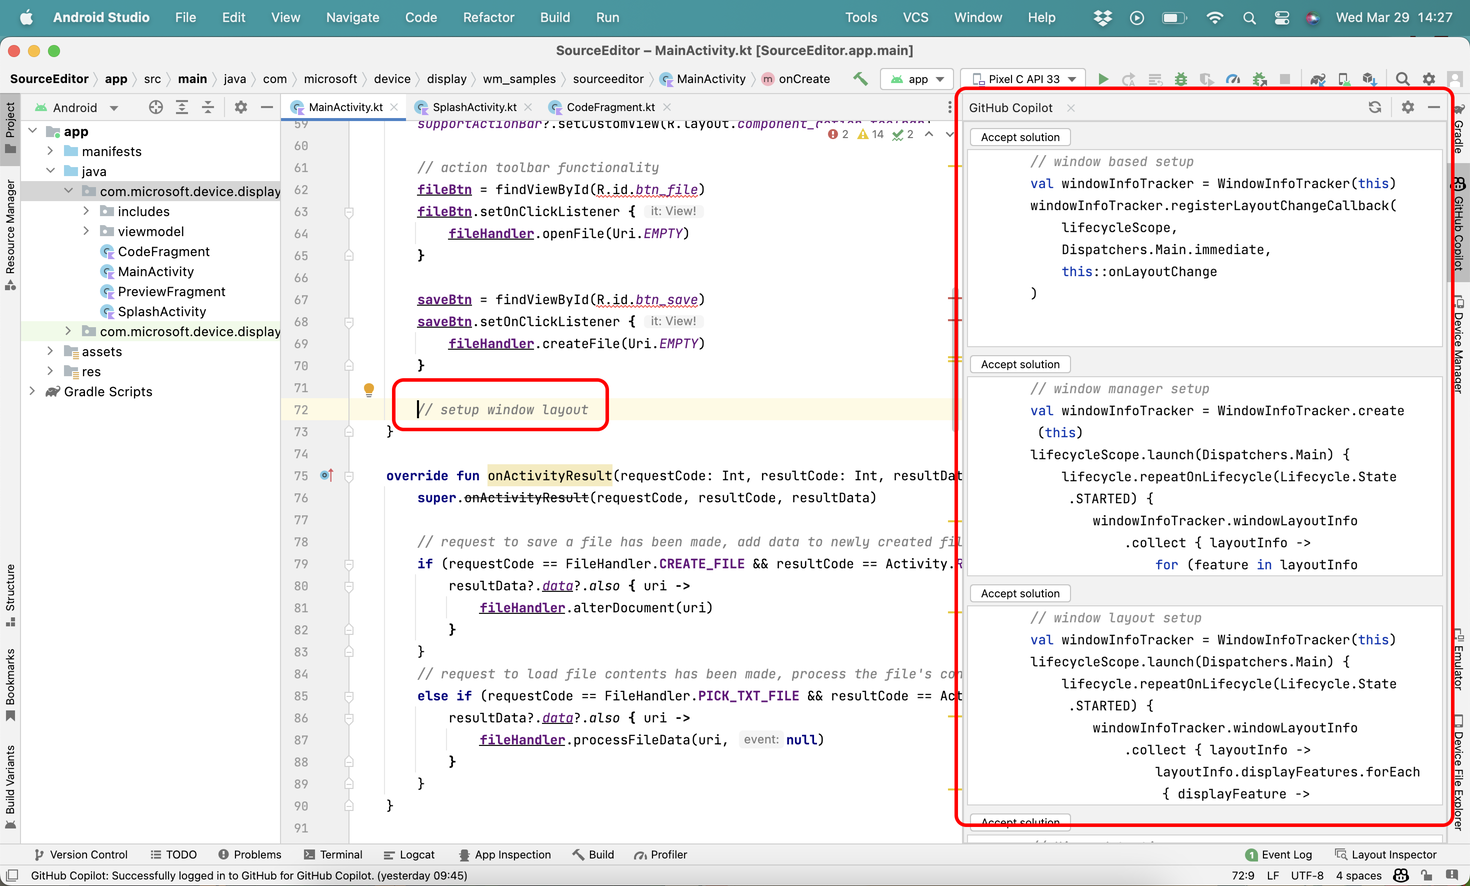 Android Studio showing Source Editor project with GitHub Copilot tool window with suggestions